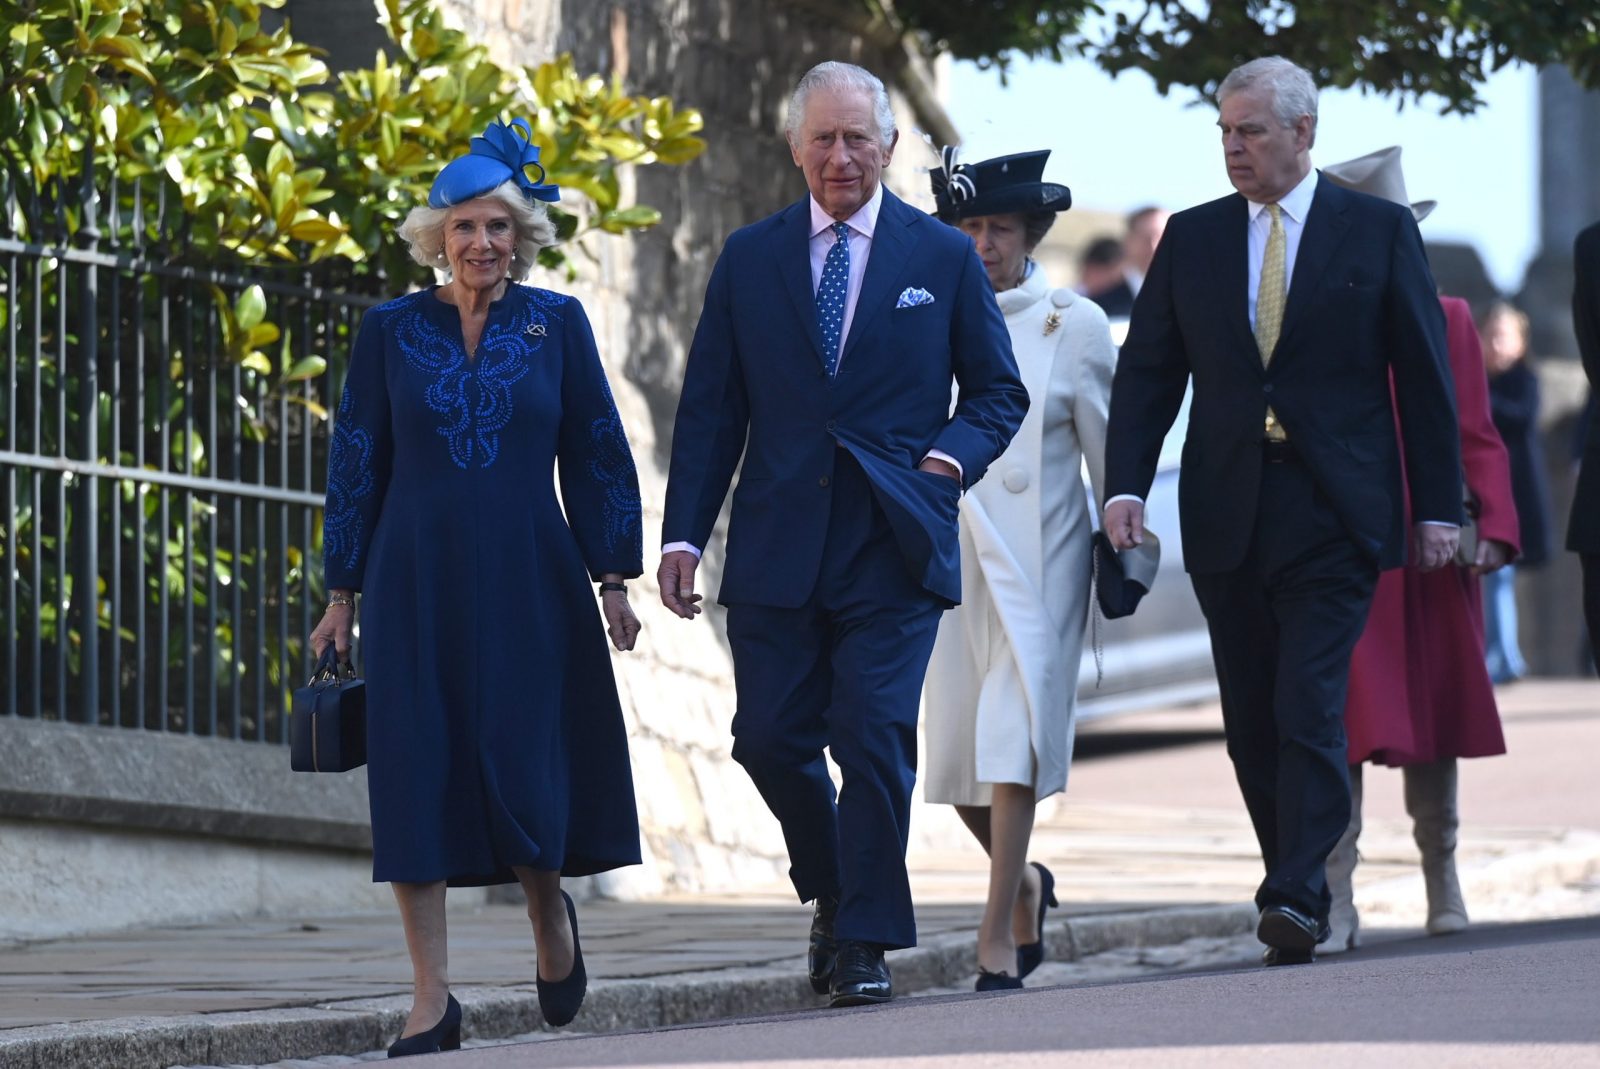 epa10565989 Britain's King Charles III (2L) and Camilla, the  Queen Consort, with Prince Andrew (R), Duke of York and Anne (2R), Princess Royal arrive for the Easter Sunday service at St Georges Chapel at Windsor Castle in Windsor, Britain, 09 April 2023.  EPA/NEIL HALL